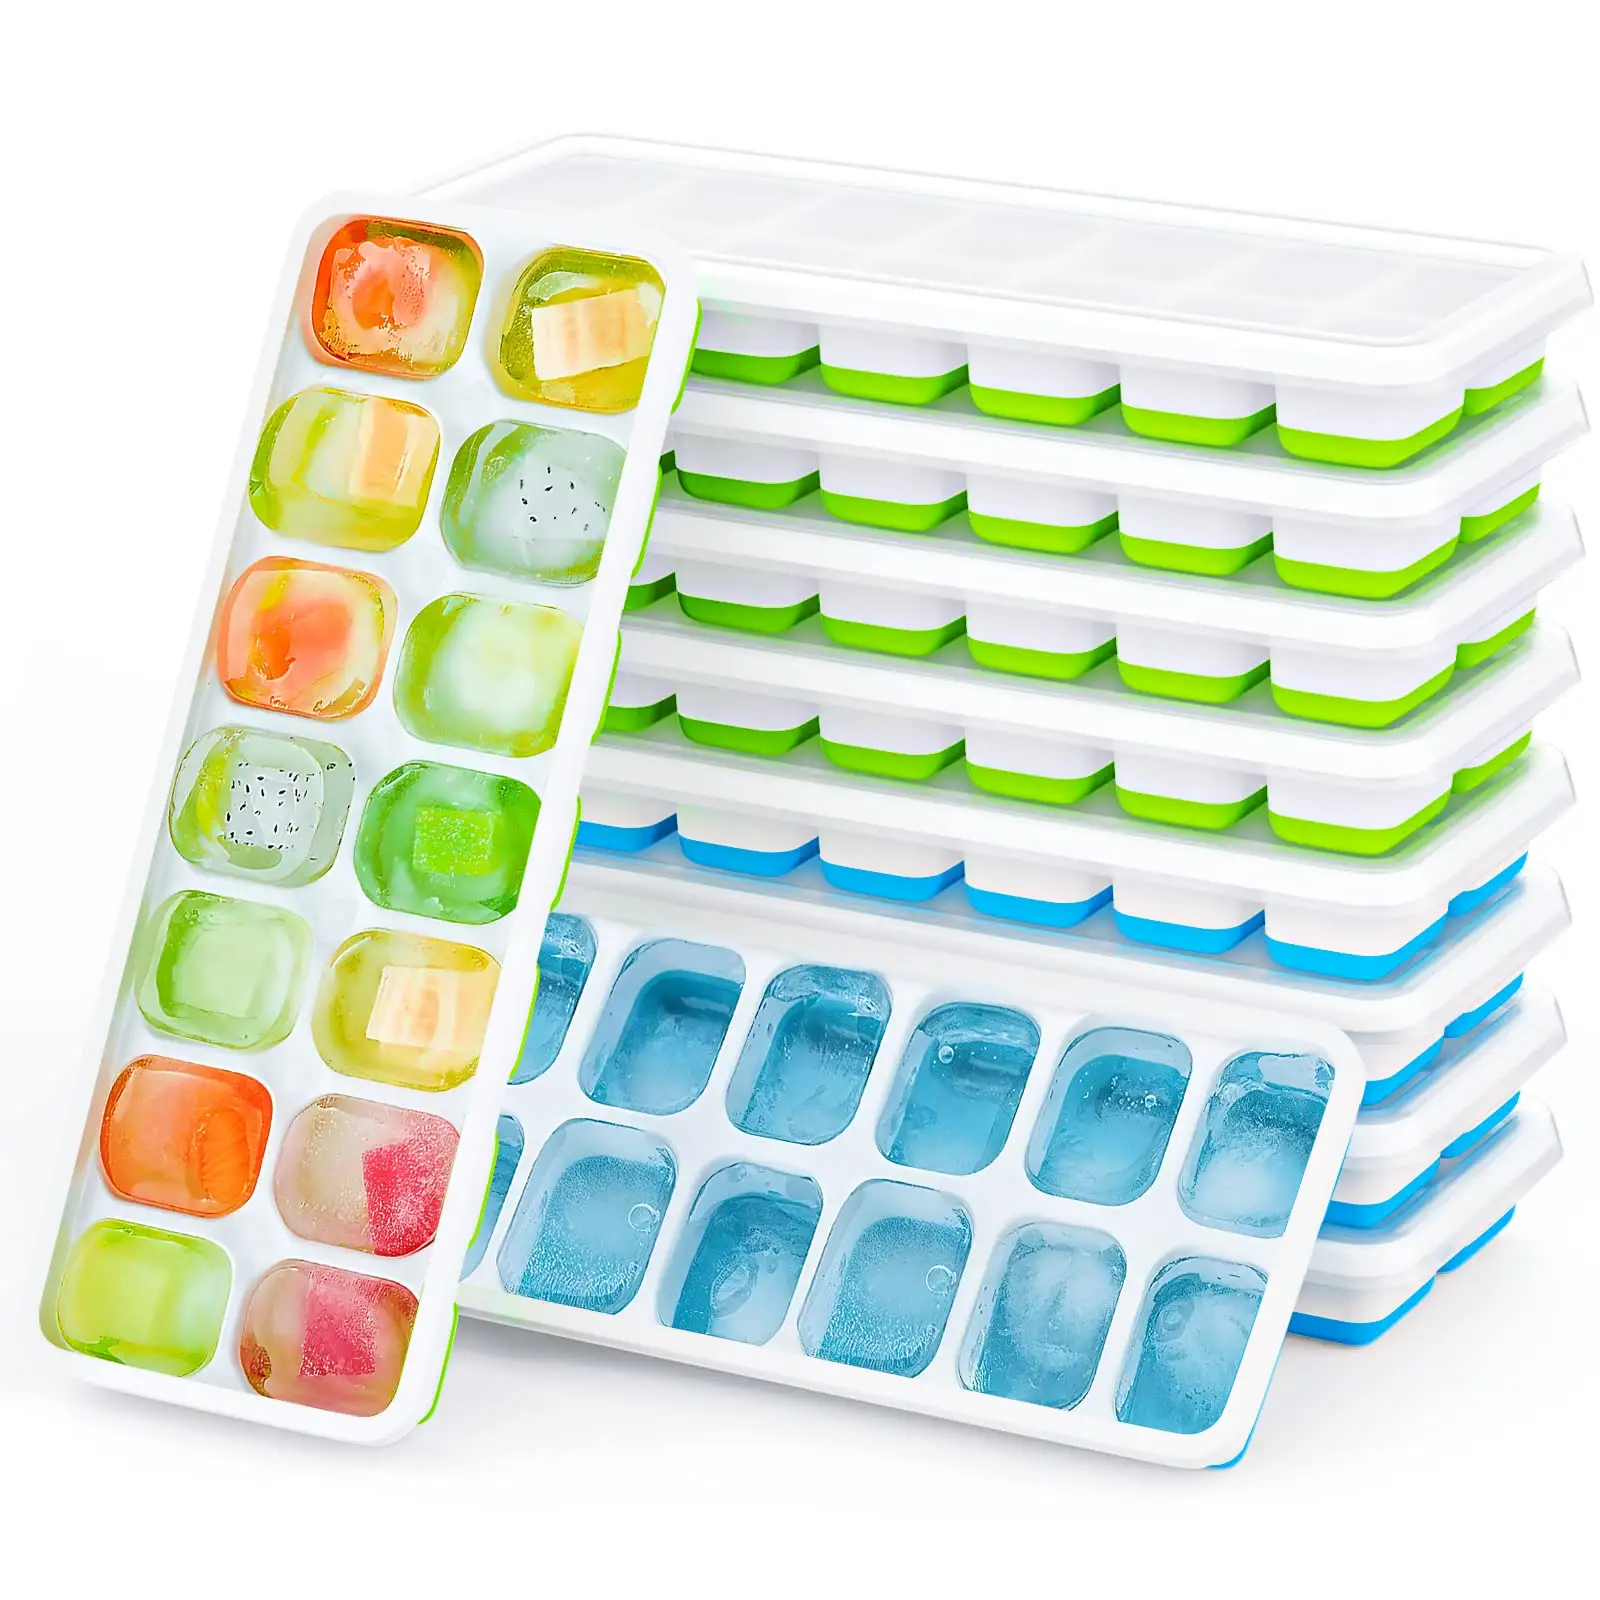 Easy Release Stackable Ice Cube Tray Cocktail Freezer Ice Cube Trays 14 Grids Silicone Ice Cube Molds With Removable Lid